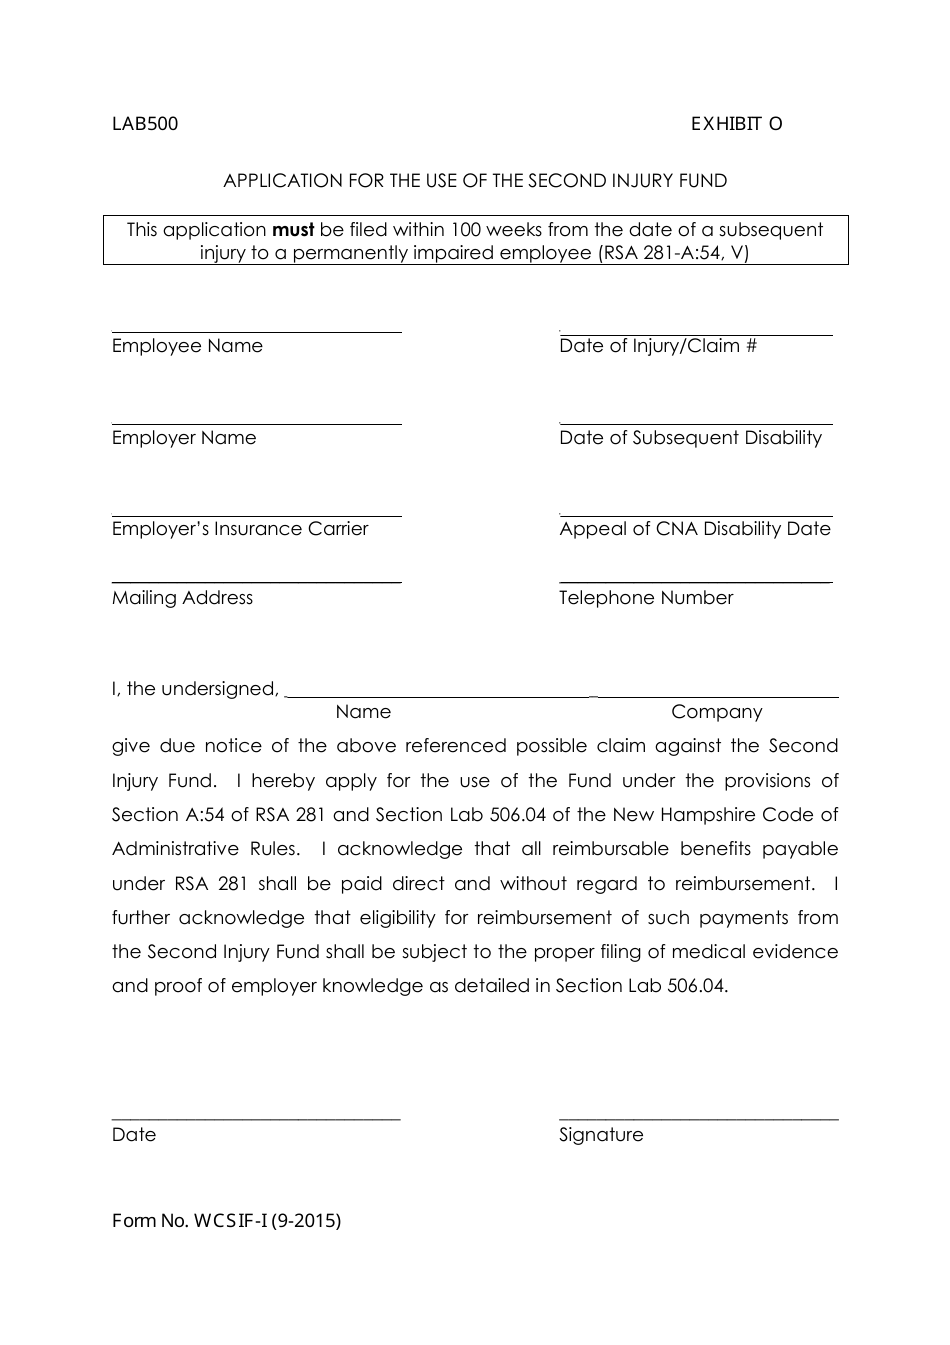 Form WCSIF-1 Exhibit O Application for the Use of the Second Injury Fund - New Hampshire, Page 1